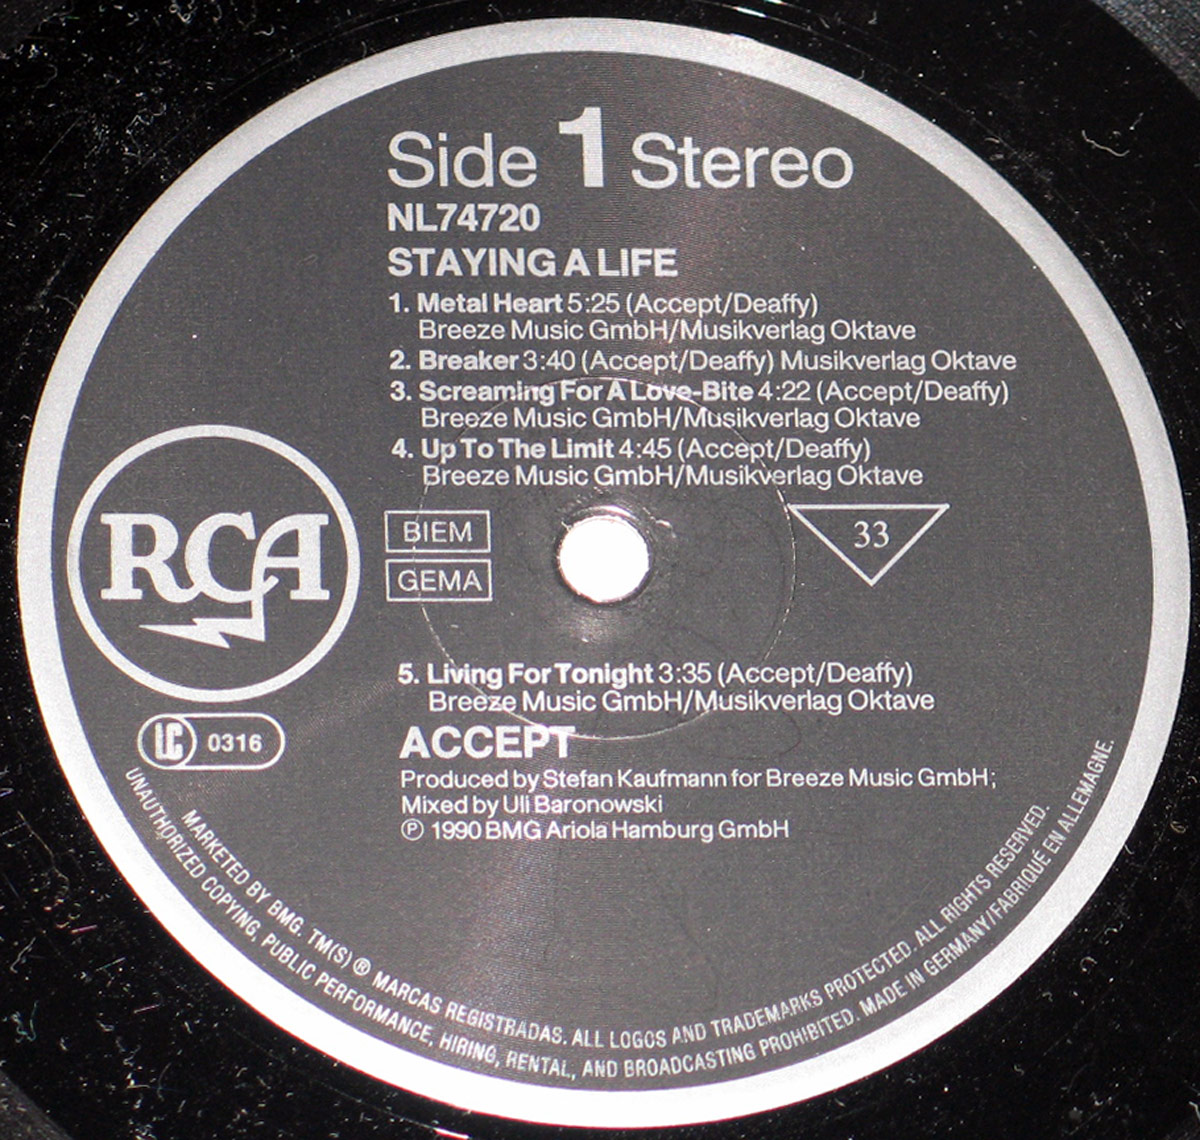 Close-up photo of the RCA Record Label with catalognr NL74720 of "Staying A Life"   Close-up photo of the RCA Record Label with catalognr NL74720 of "Staying A Life"   